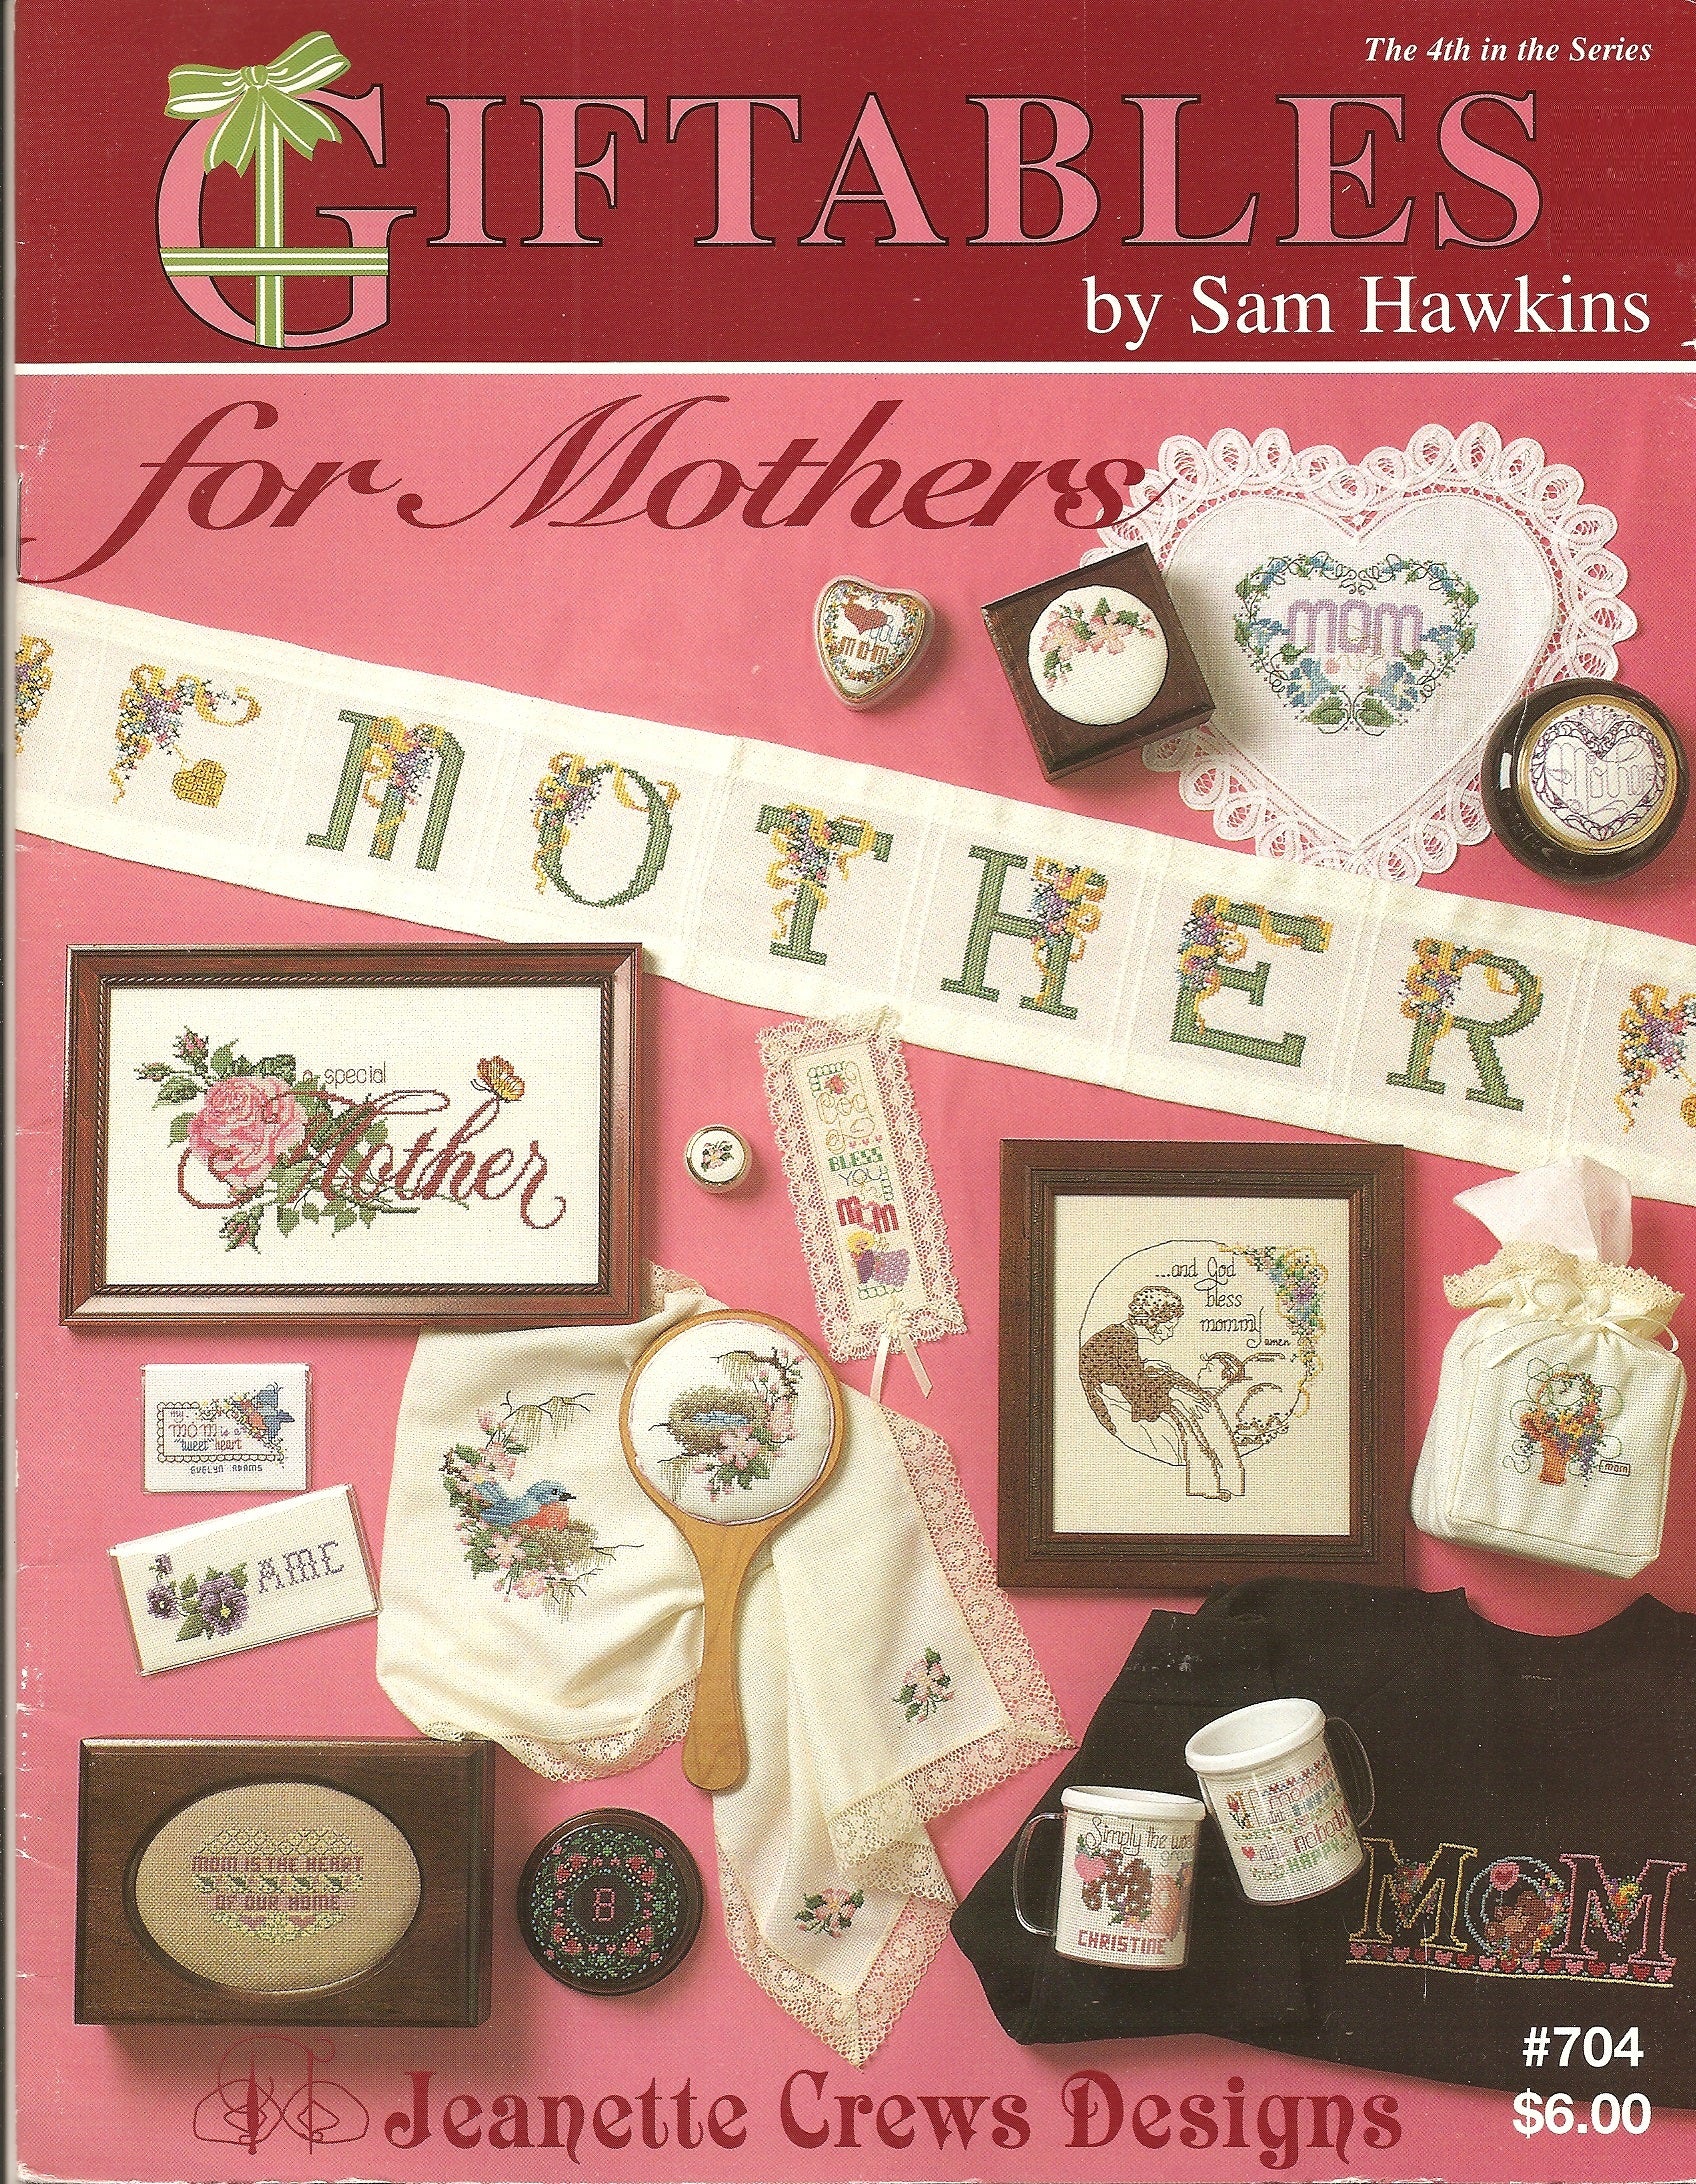 Jeanette Crews For Mothers Giftables by Sam Hawkins cross stitch pattern